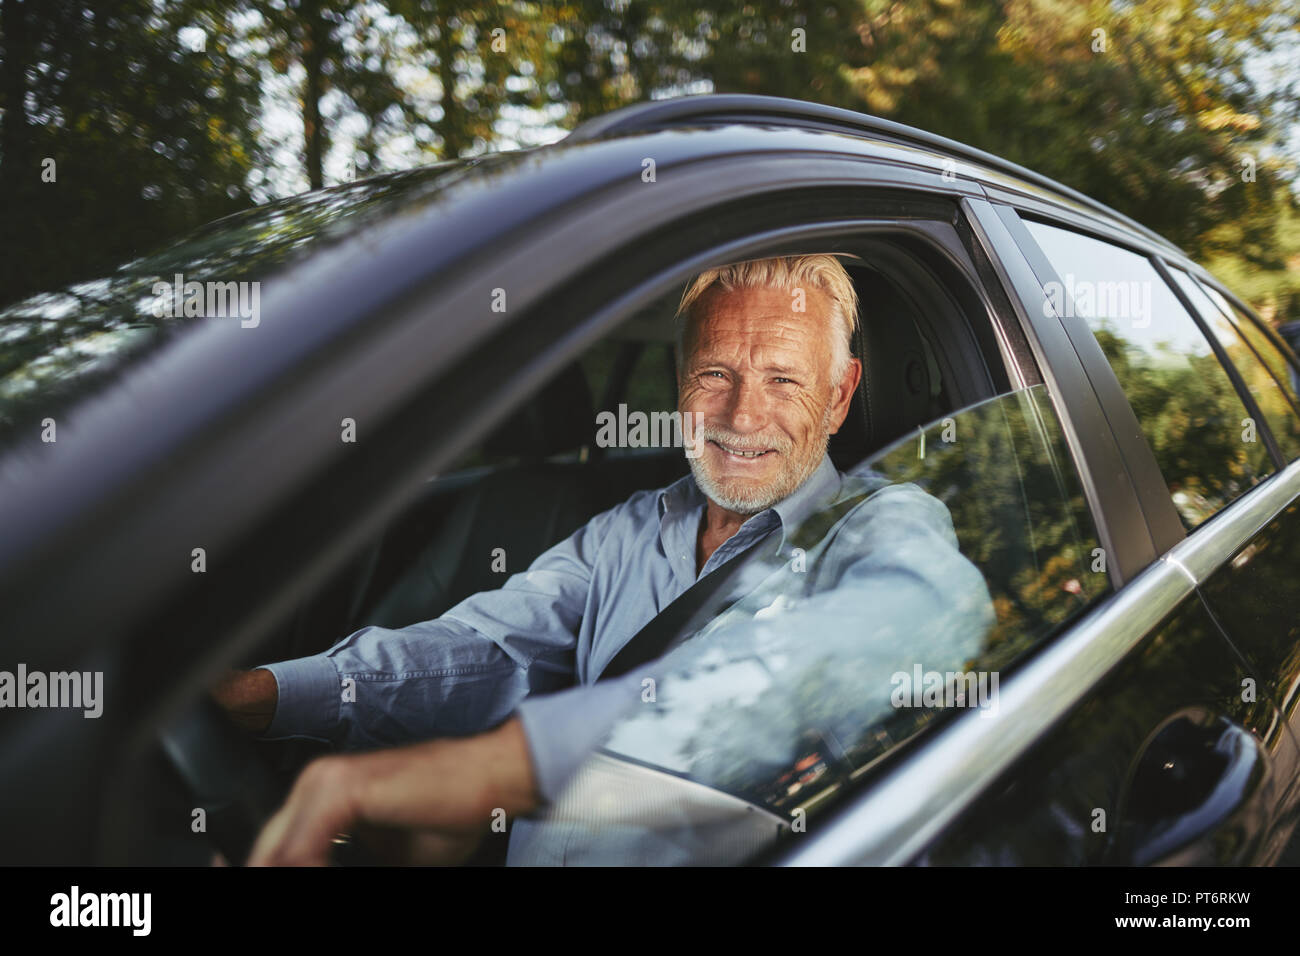 Senior man smiling while sitting in his car enjoying a drive along a tree lined road in the countryside Stock Photo